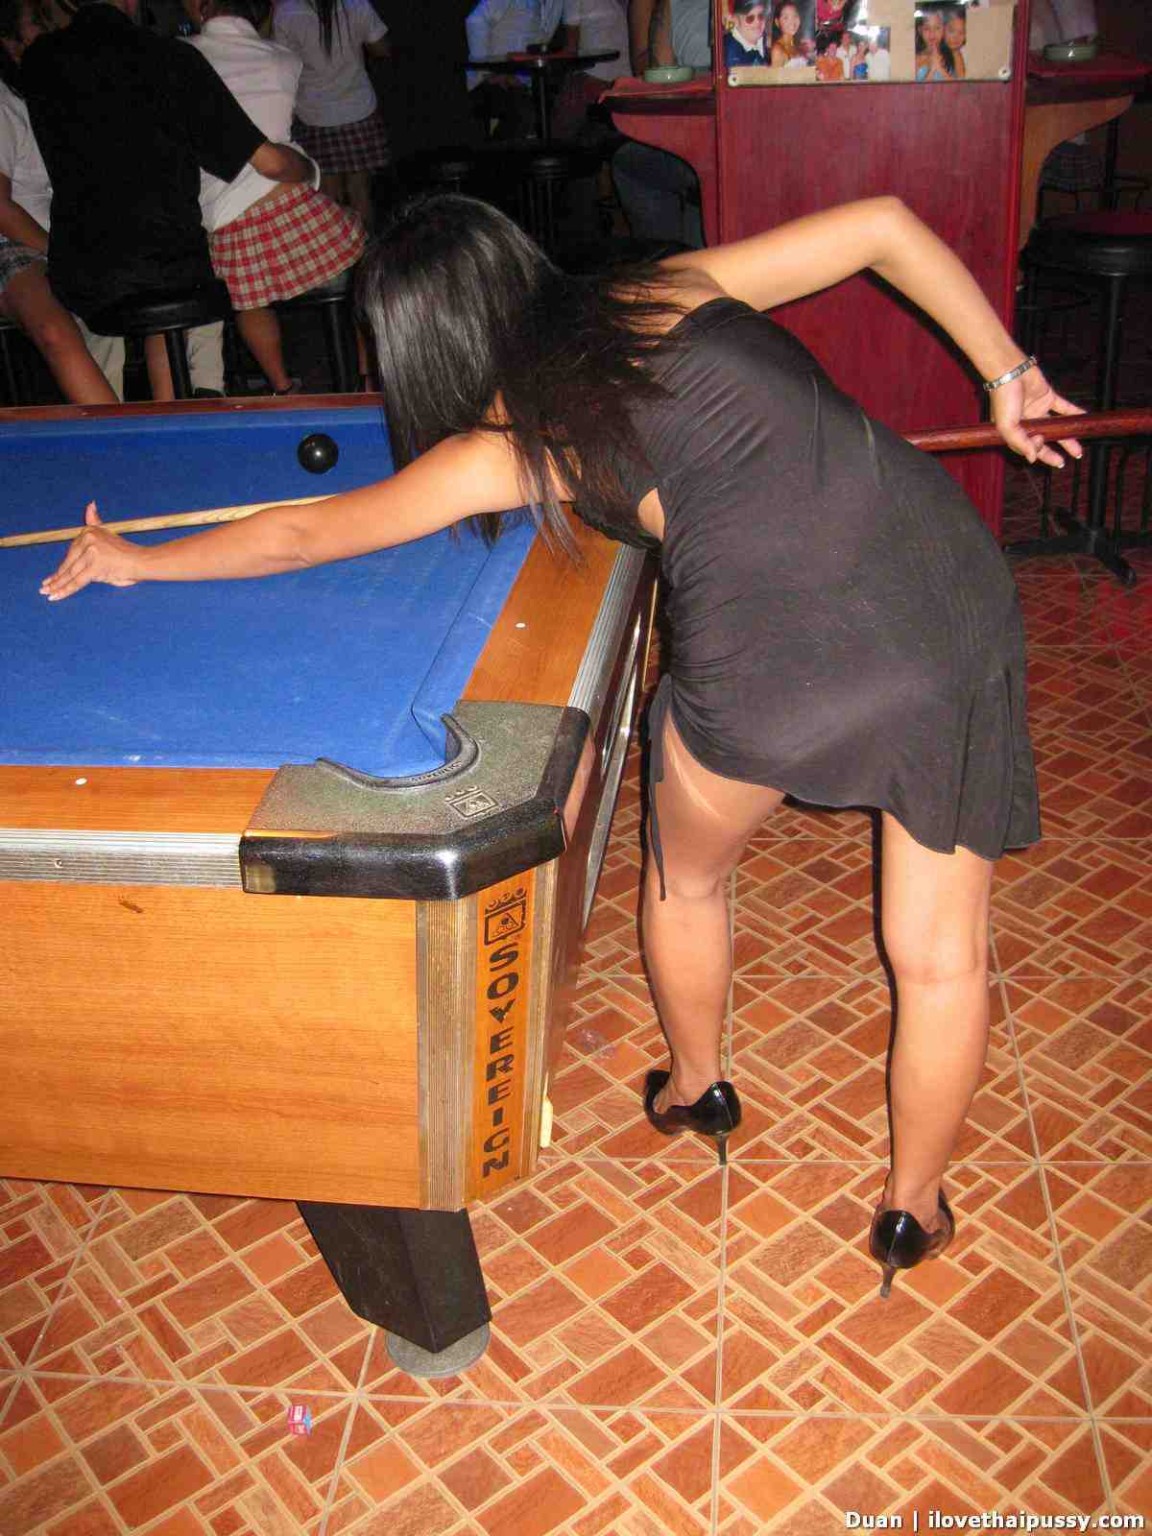 Thailand Bargirl plays pool and sucks tourist cock for money #69883351